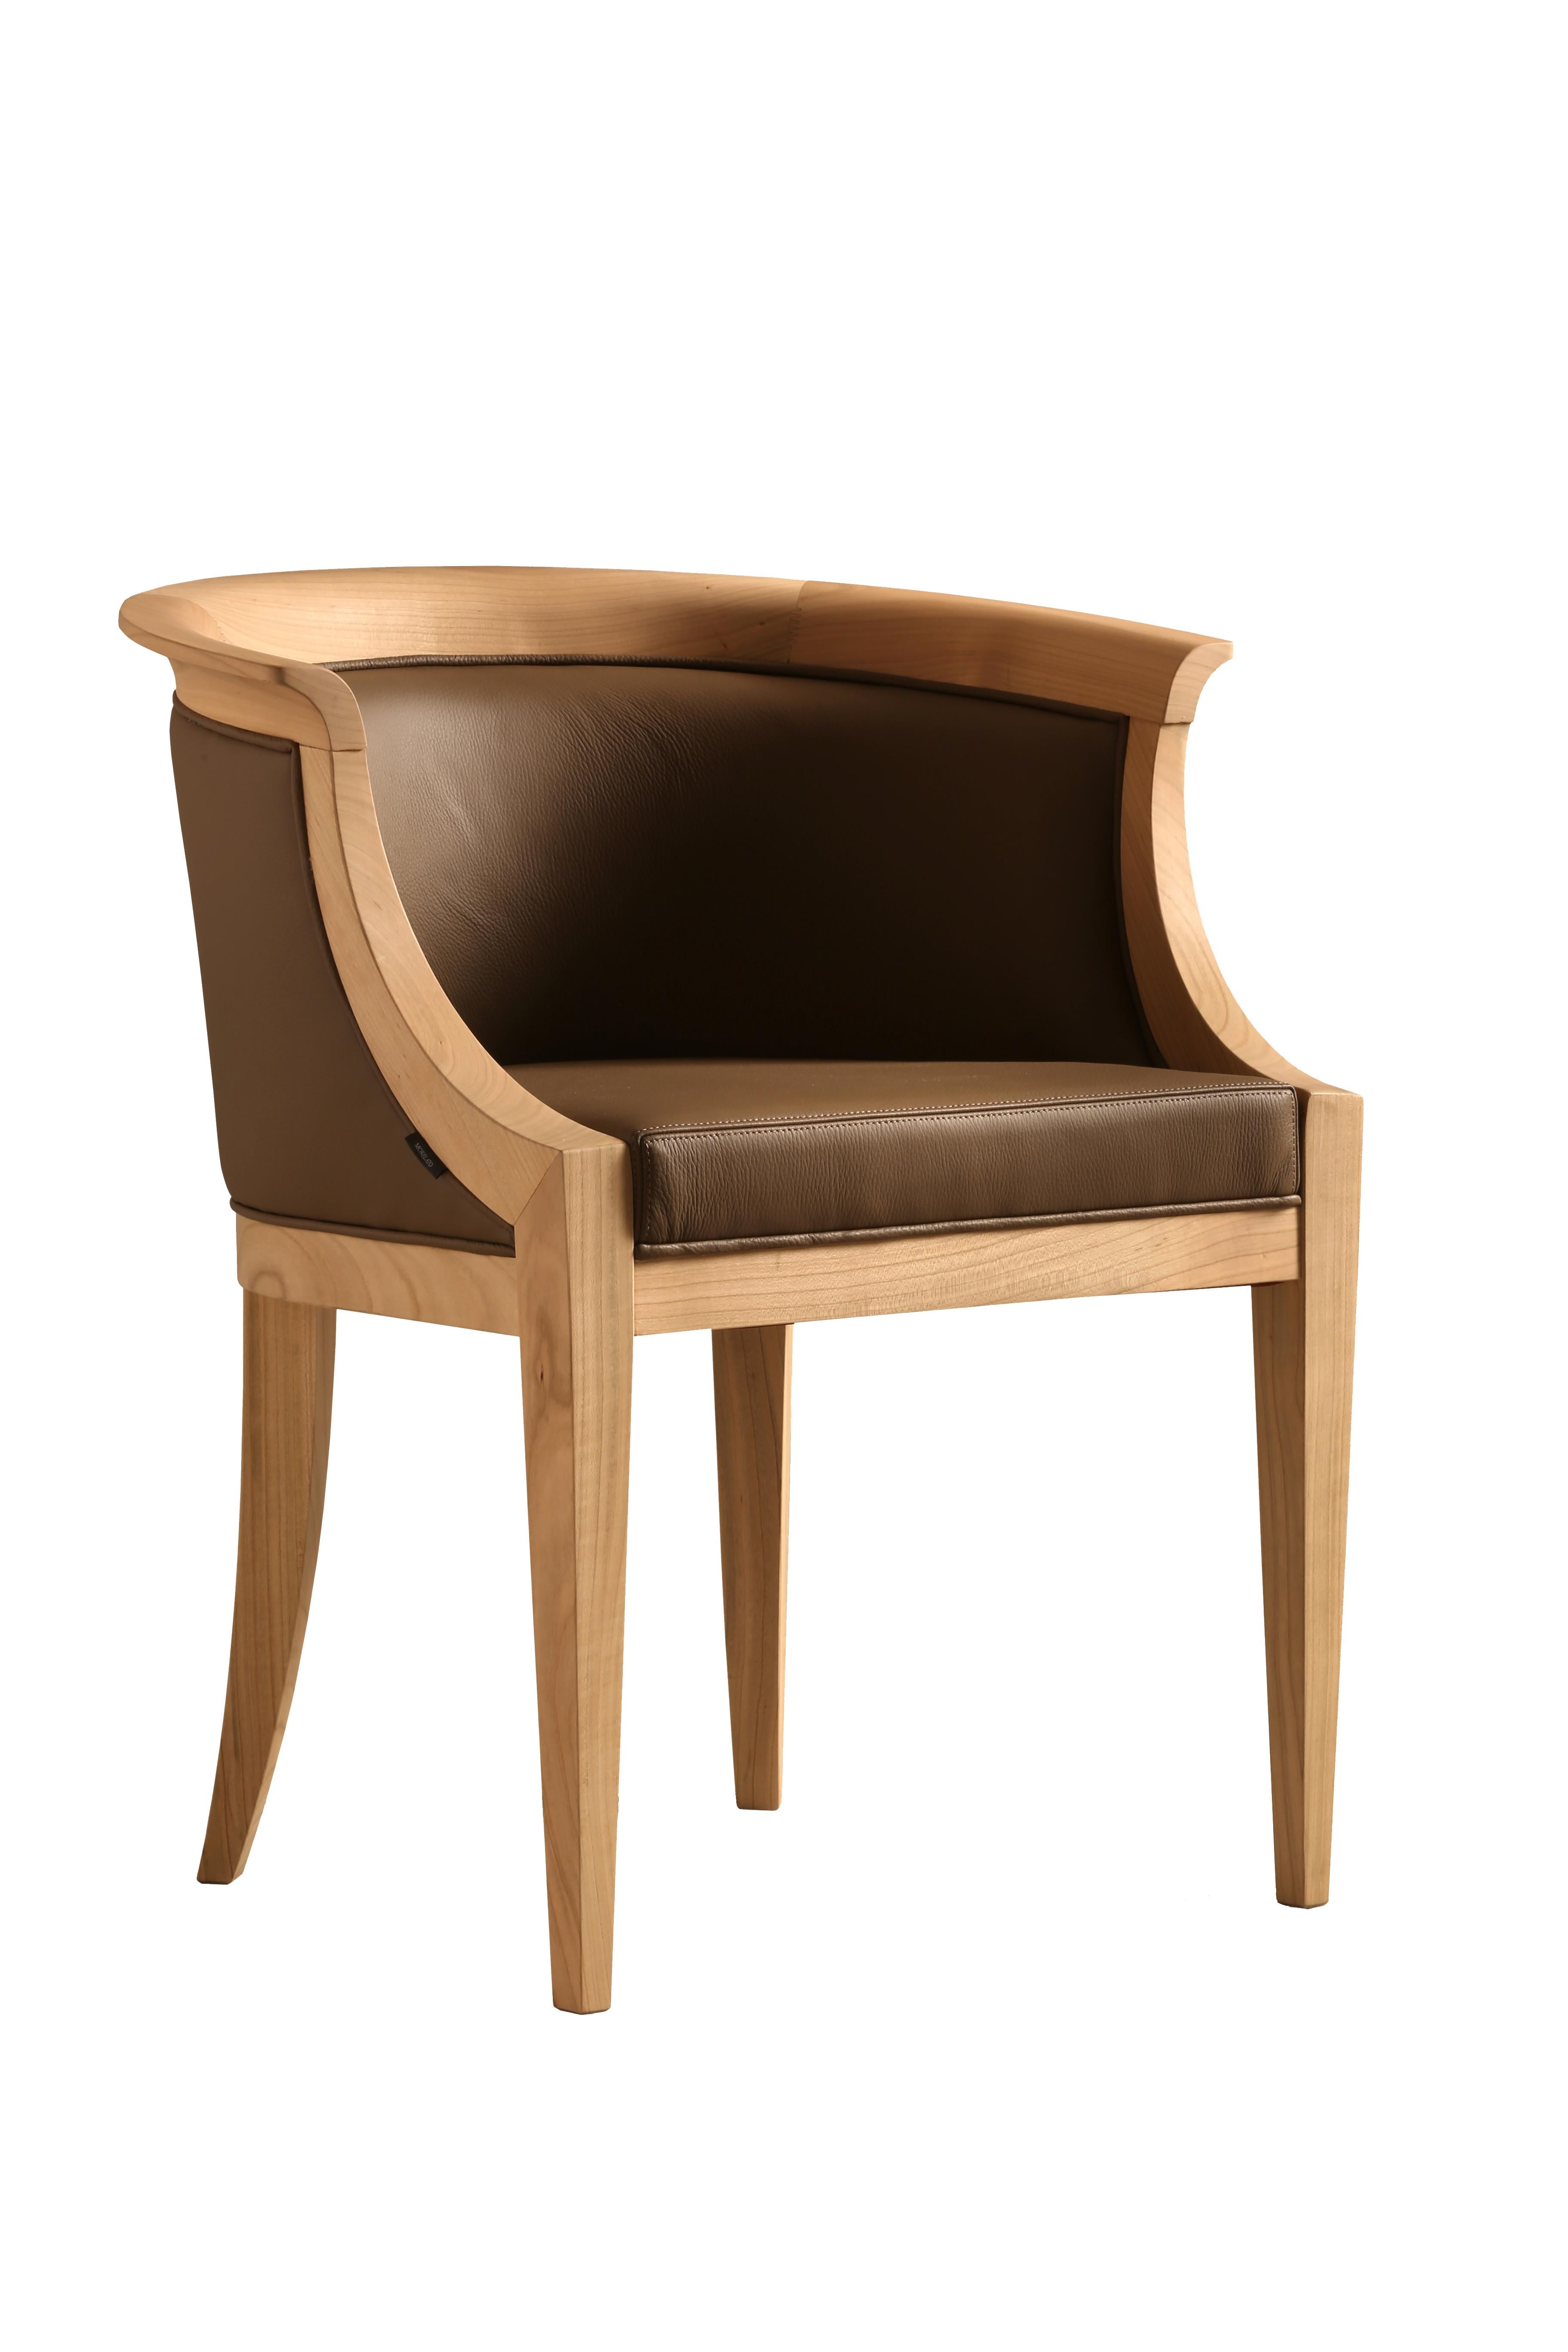 Biedermeier style upholstered armchair made of cherrywood. 
Upholstered with leather or fabric.
Customizable with different wood finishes and coating materials/colors
made in Italy by Morelato

  